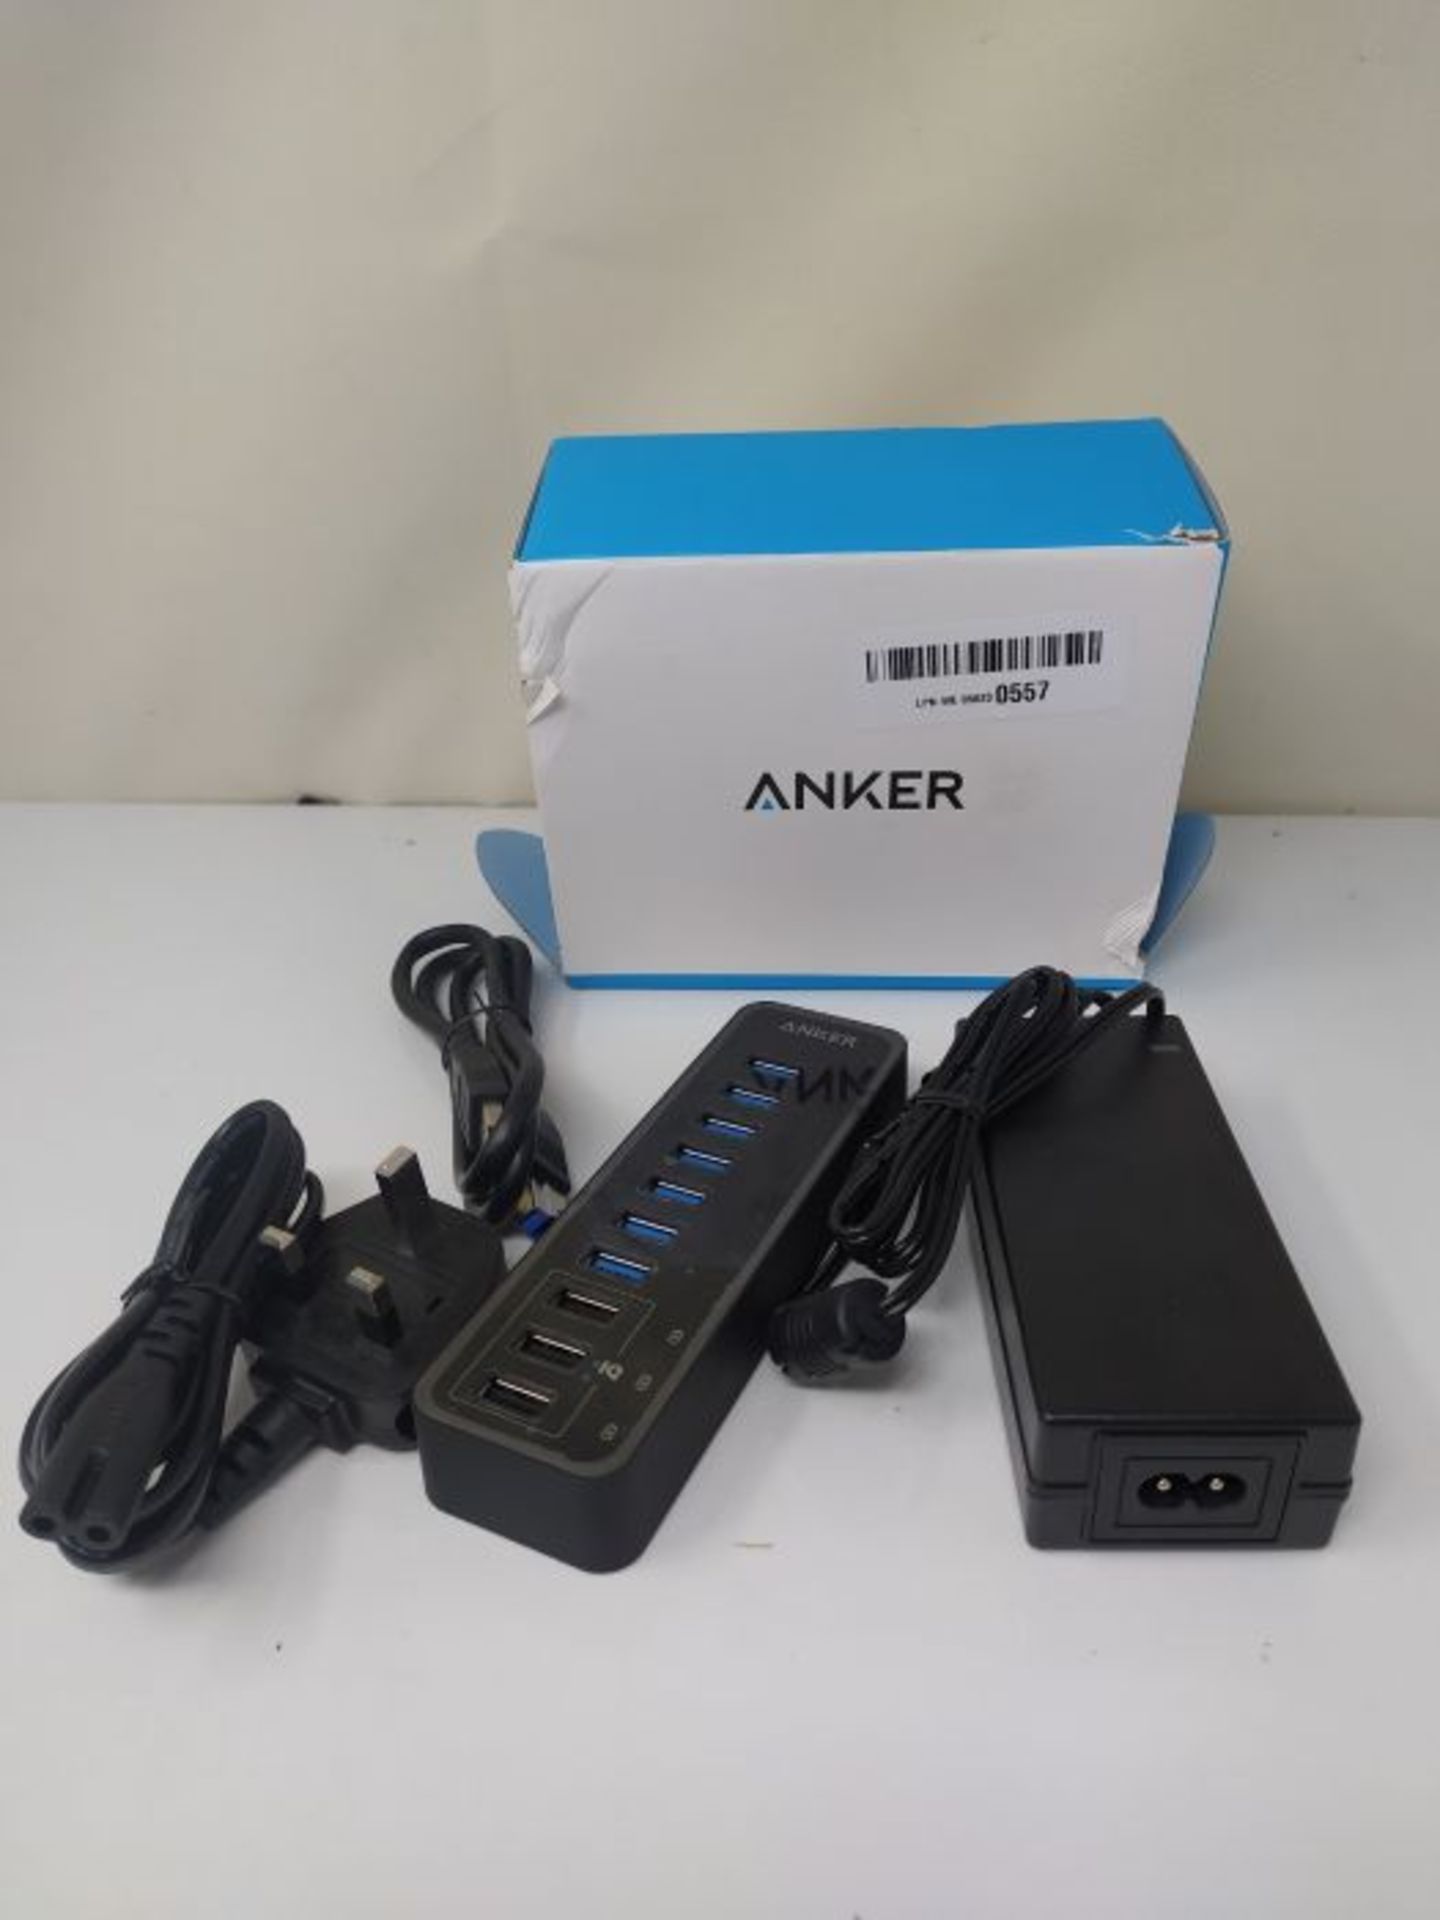 Anker 10 Port 60W Data Hub with 7 USB 3.0 Ports and 3 PowerIQ Charging Ports for Macbo - Image 2 of 2